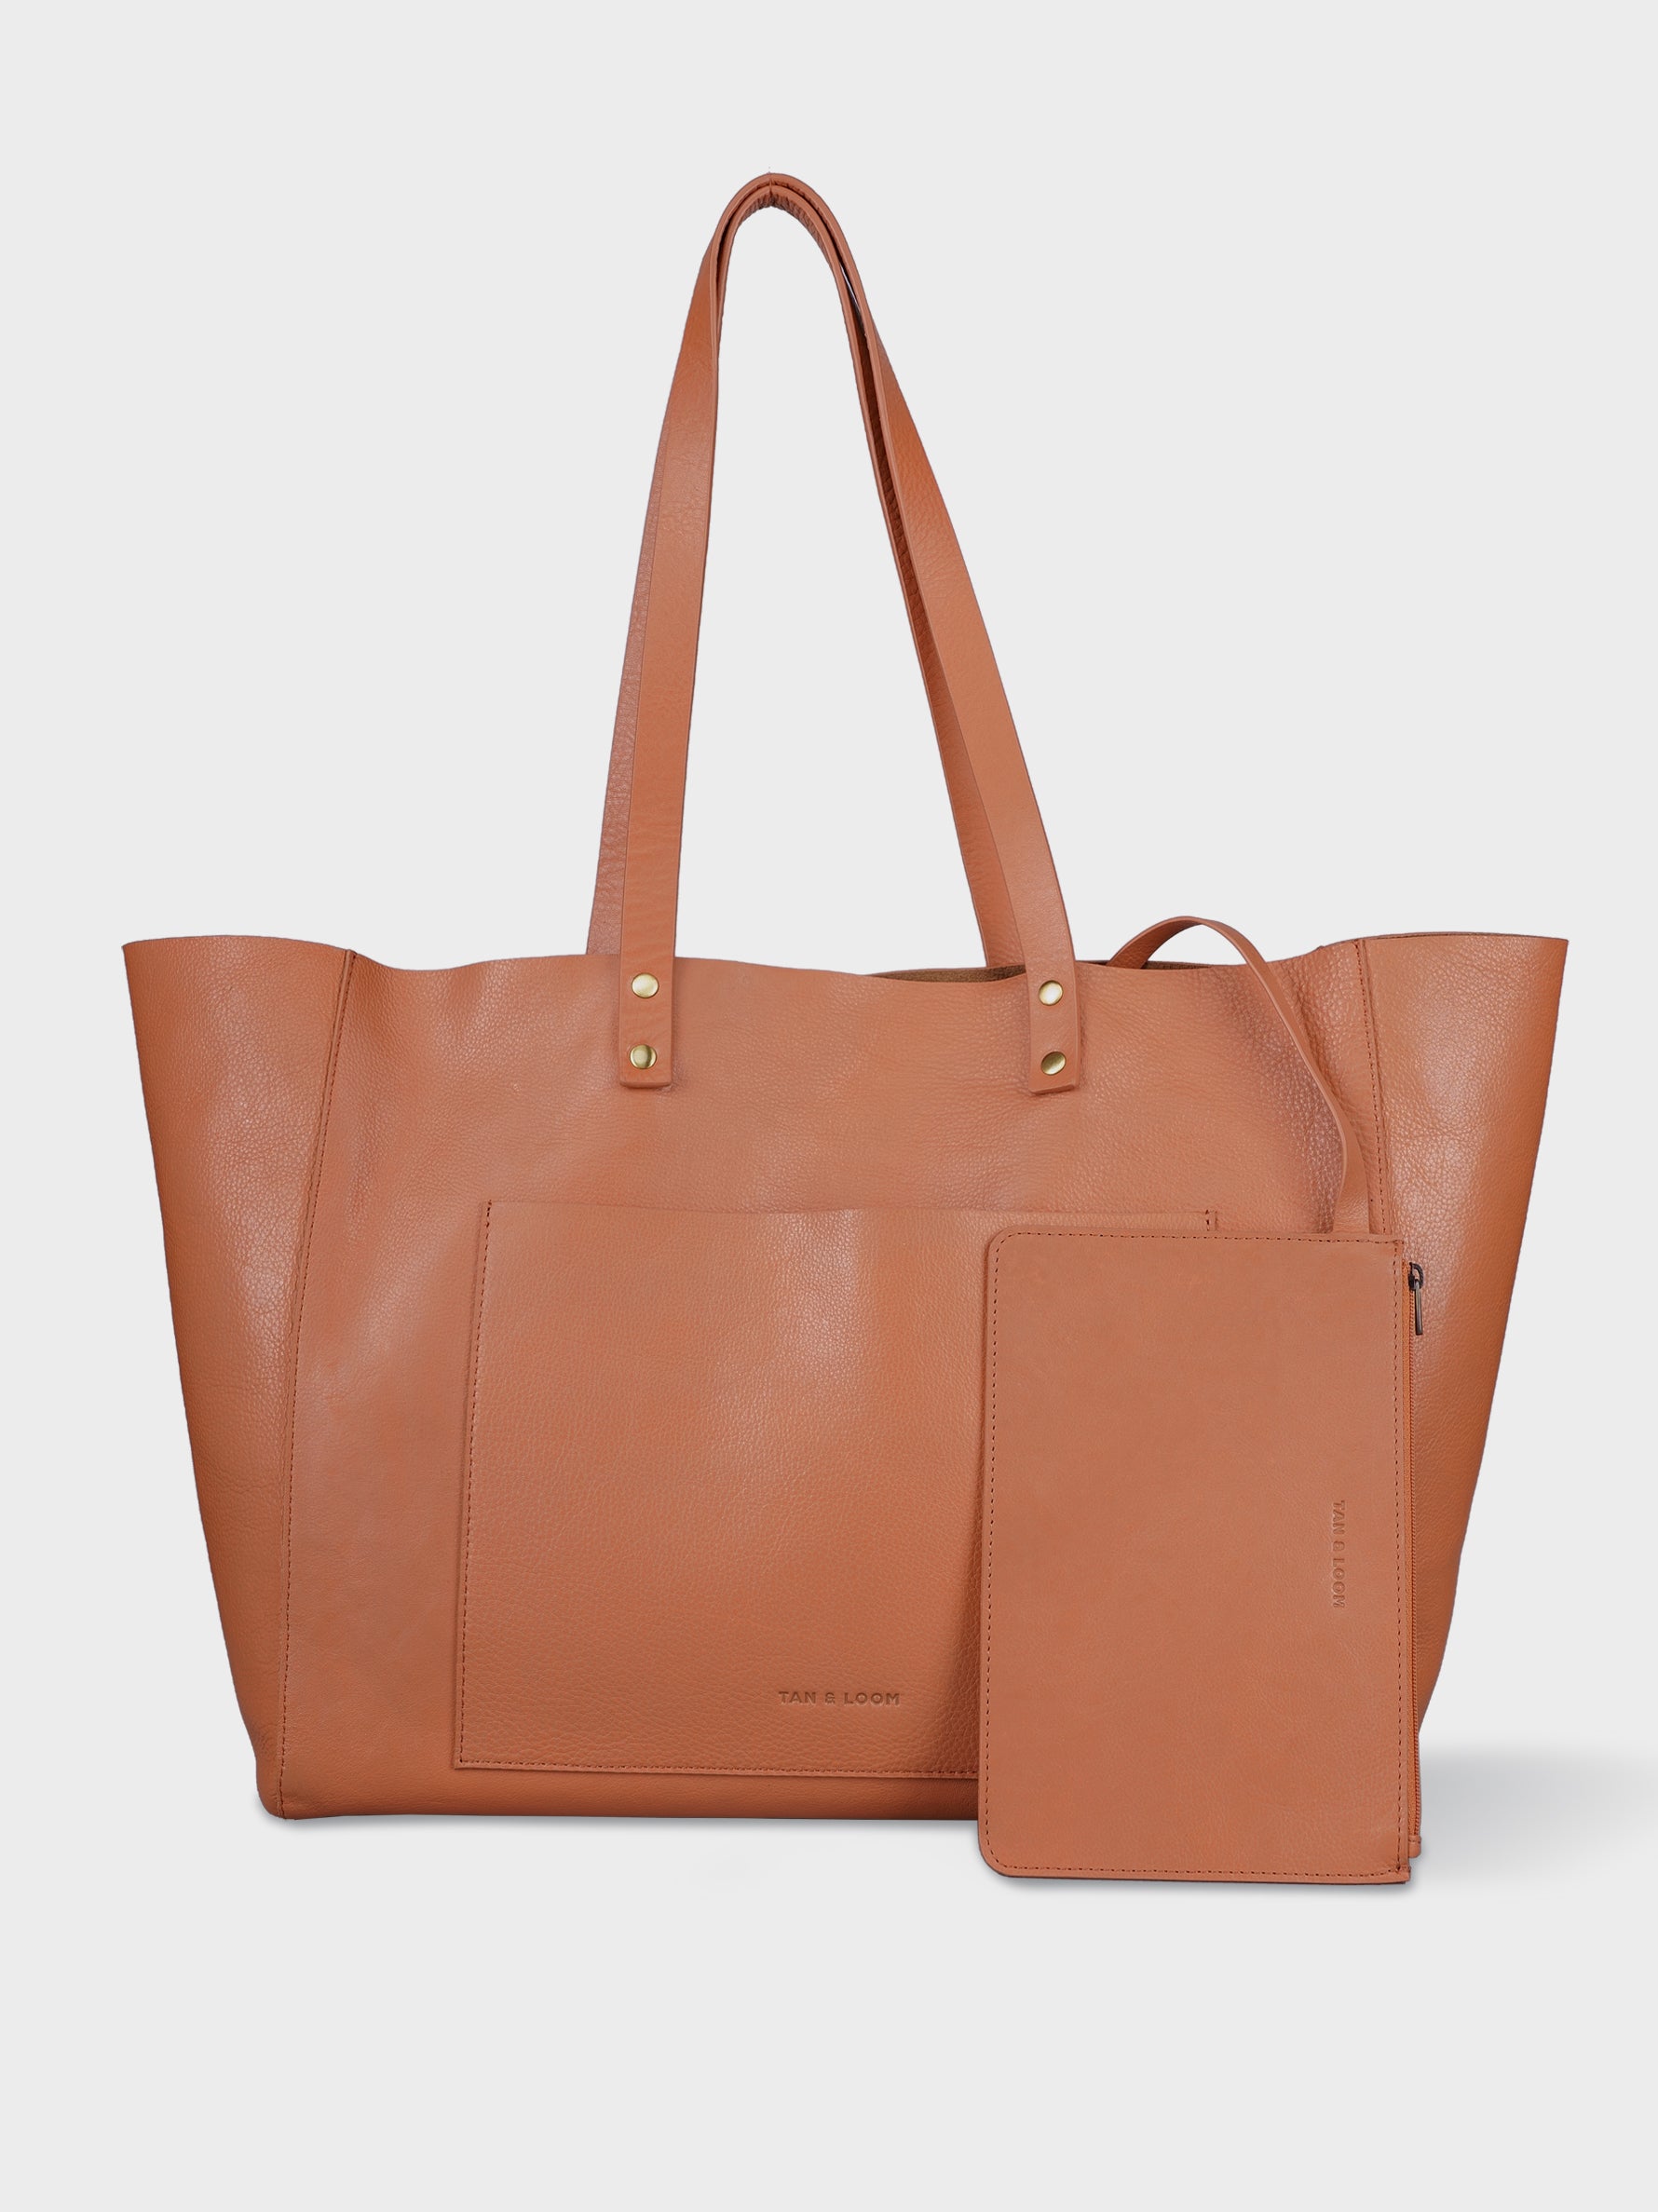 Handcrafted Genuine Vegetable Tanned Leather Old Fashioned Tote Large Dusty Peach  for Women Tan & Loom